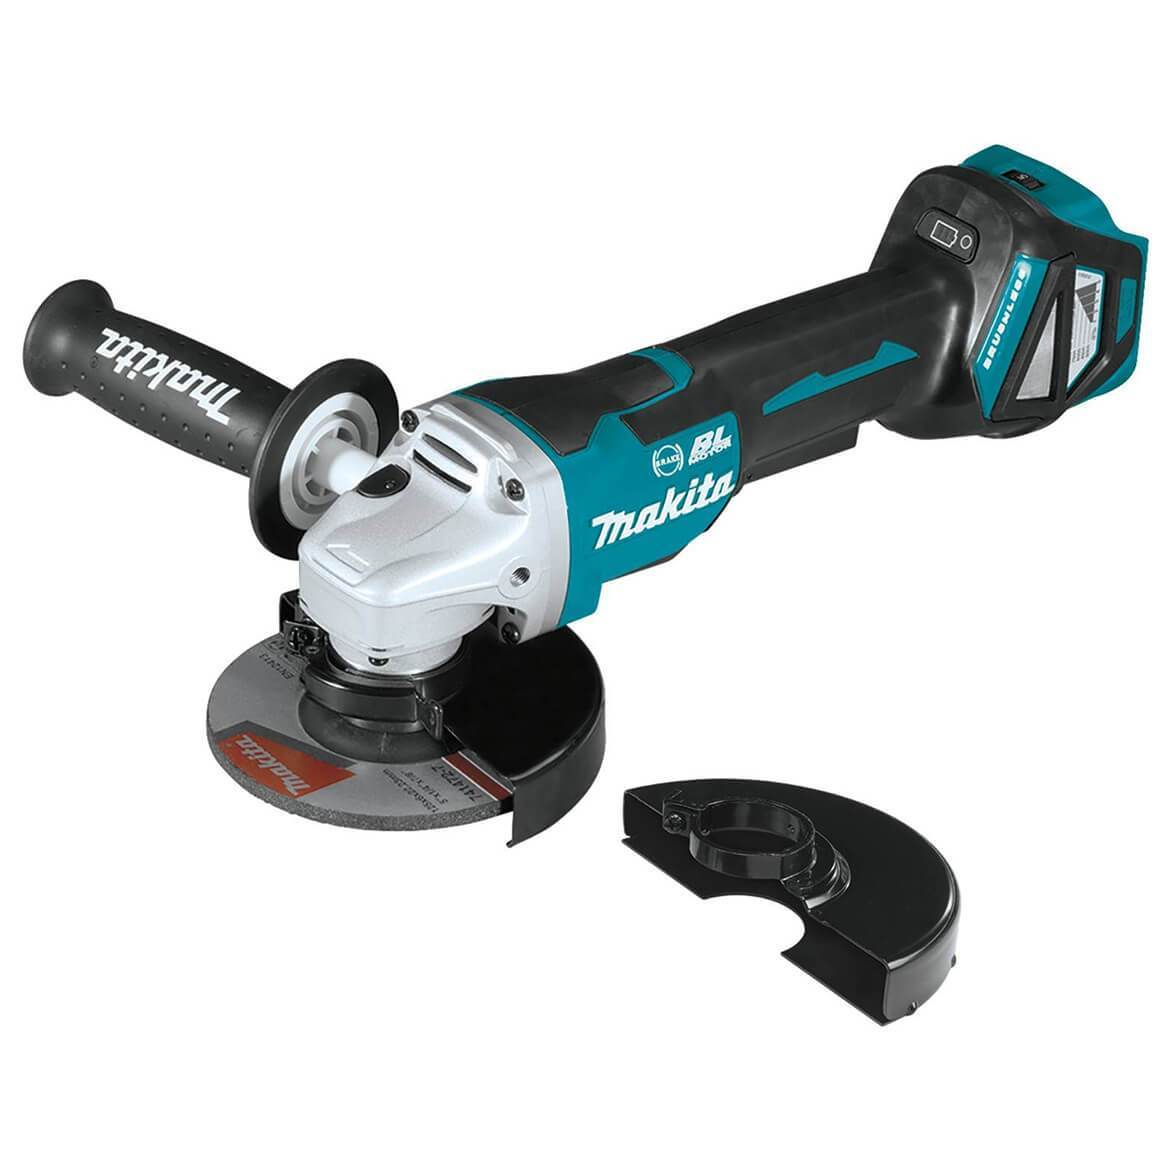 Makita XAG20Z 18-Volt Brake Paddle Switch Cut-Off/Angle Grinder - Bare Tool - image 1 of 14